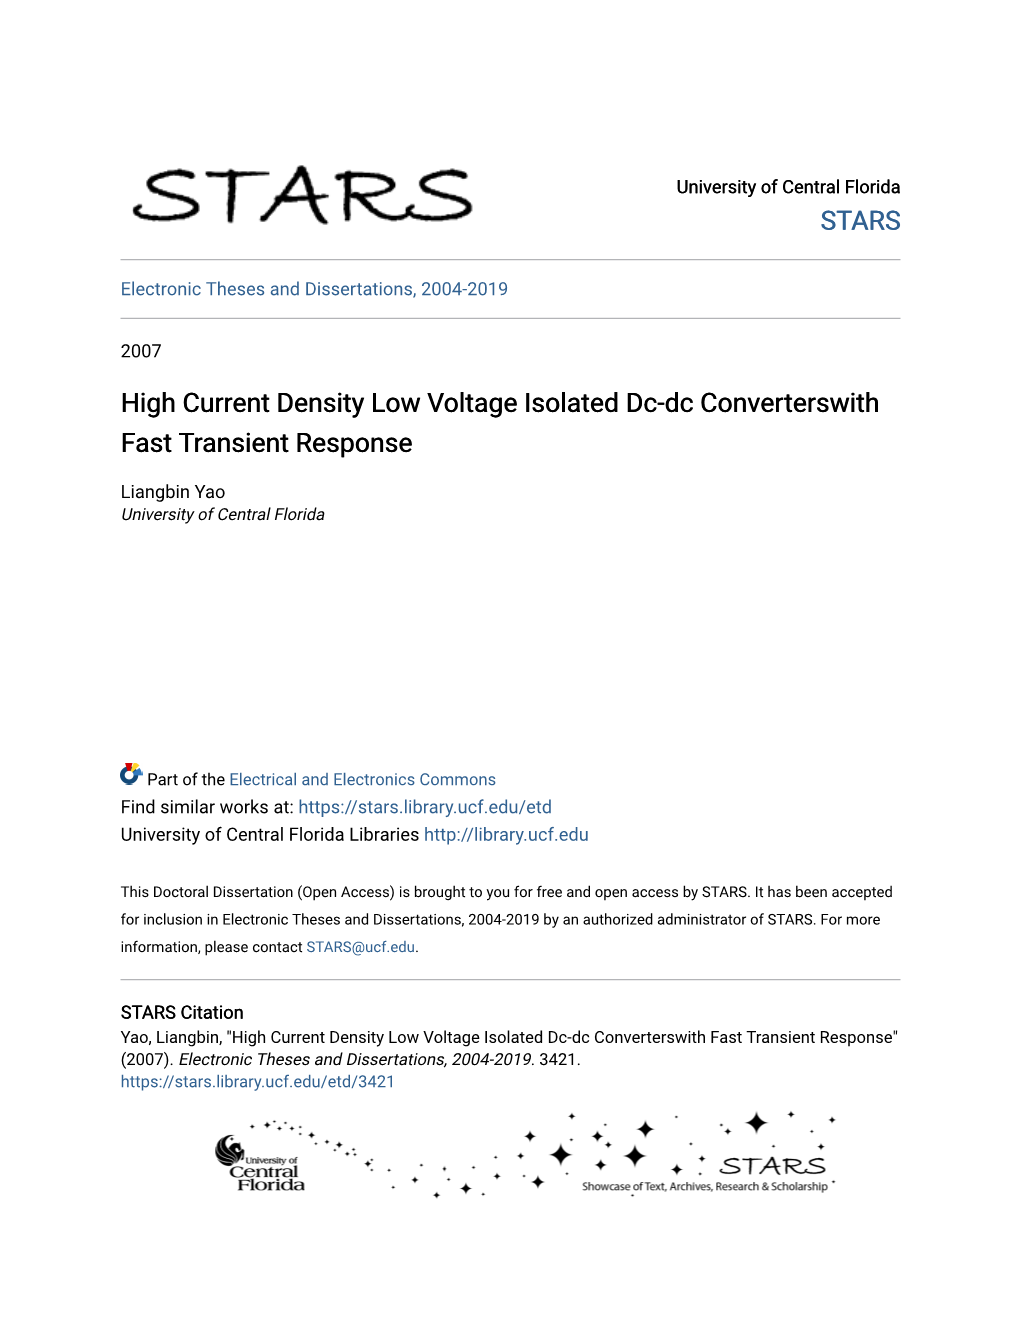 High Current Density Low Voltage Isolated Dc-Dc Converterswith Fast Transient Response